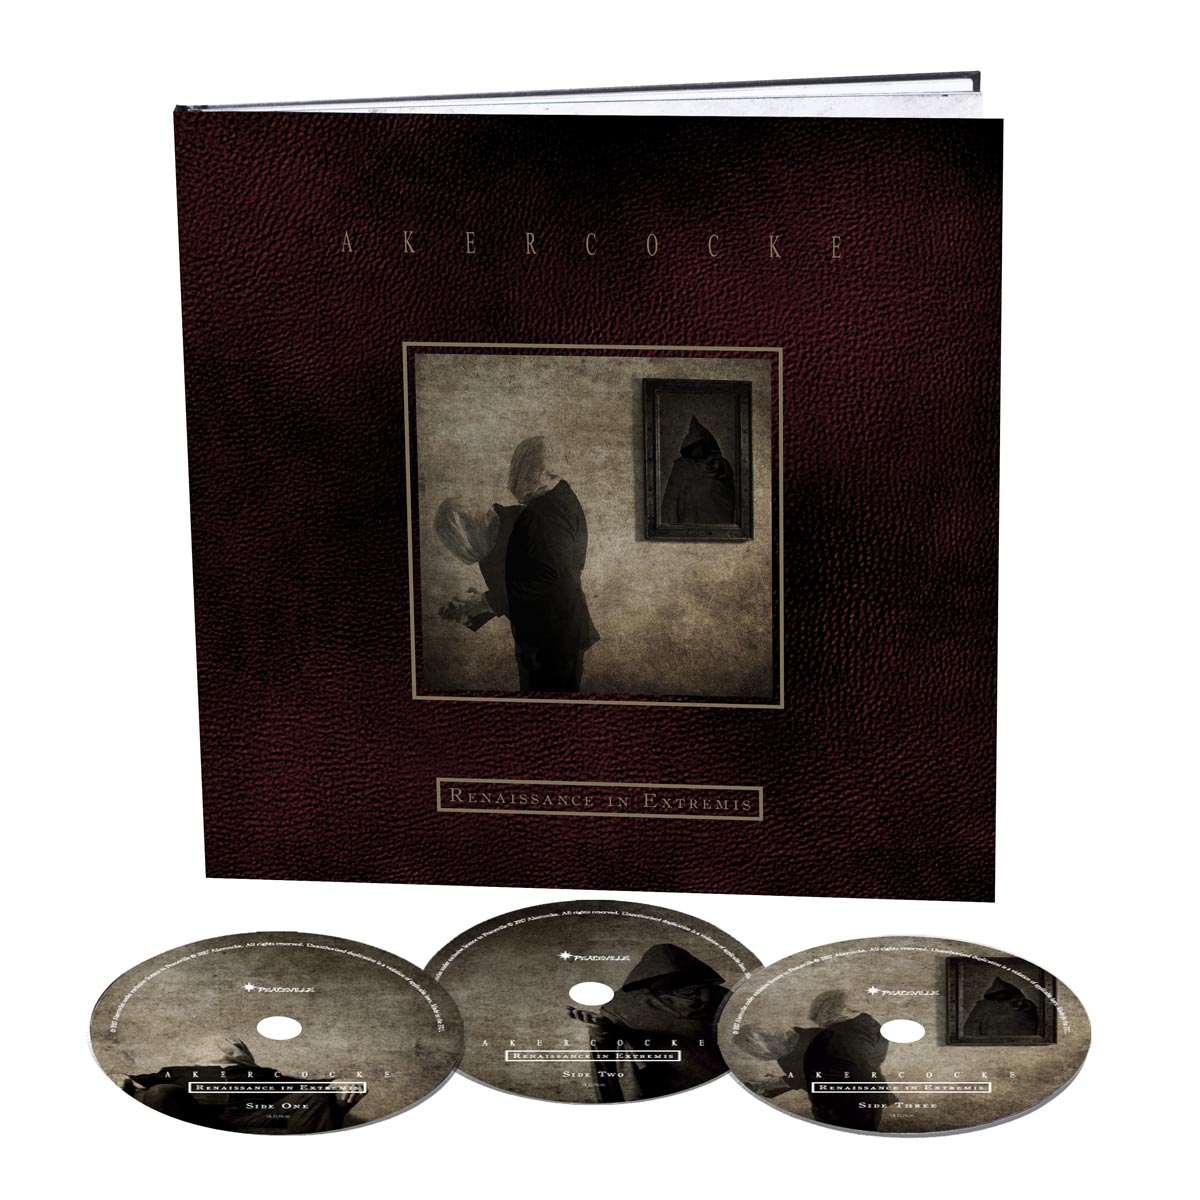 Akercocke "Renaissance In Extremis" Special Edition 3CD